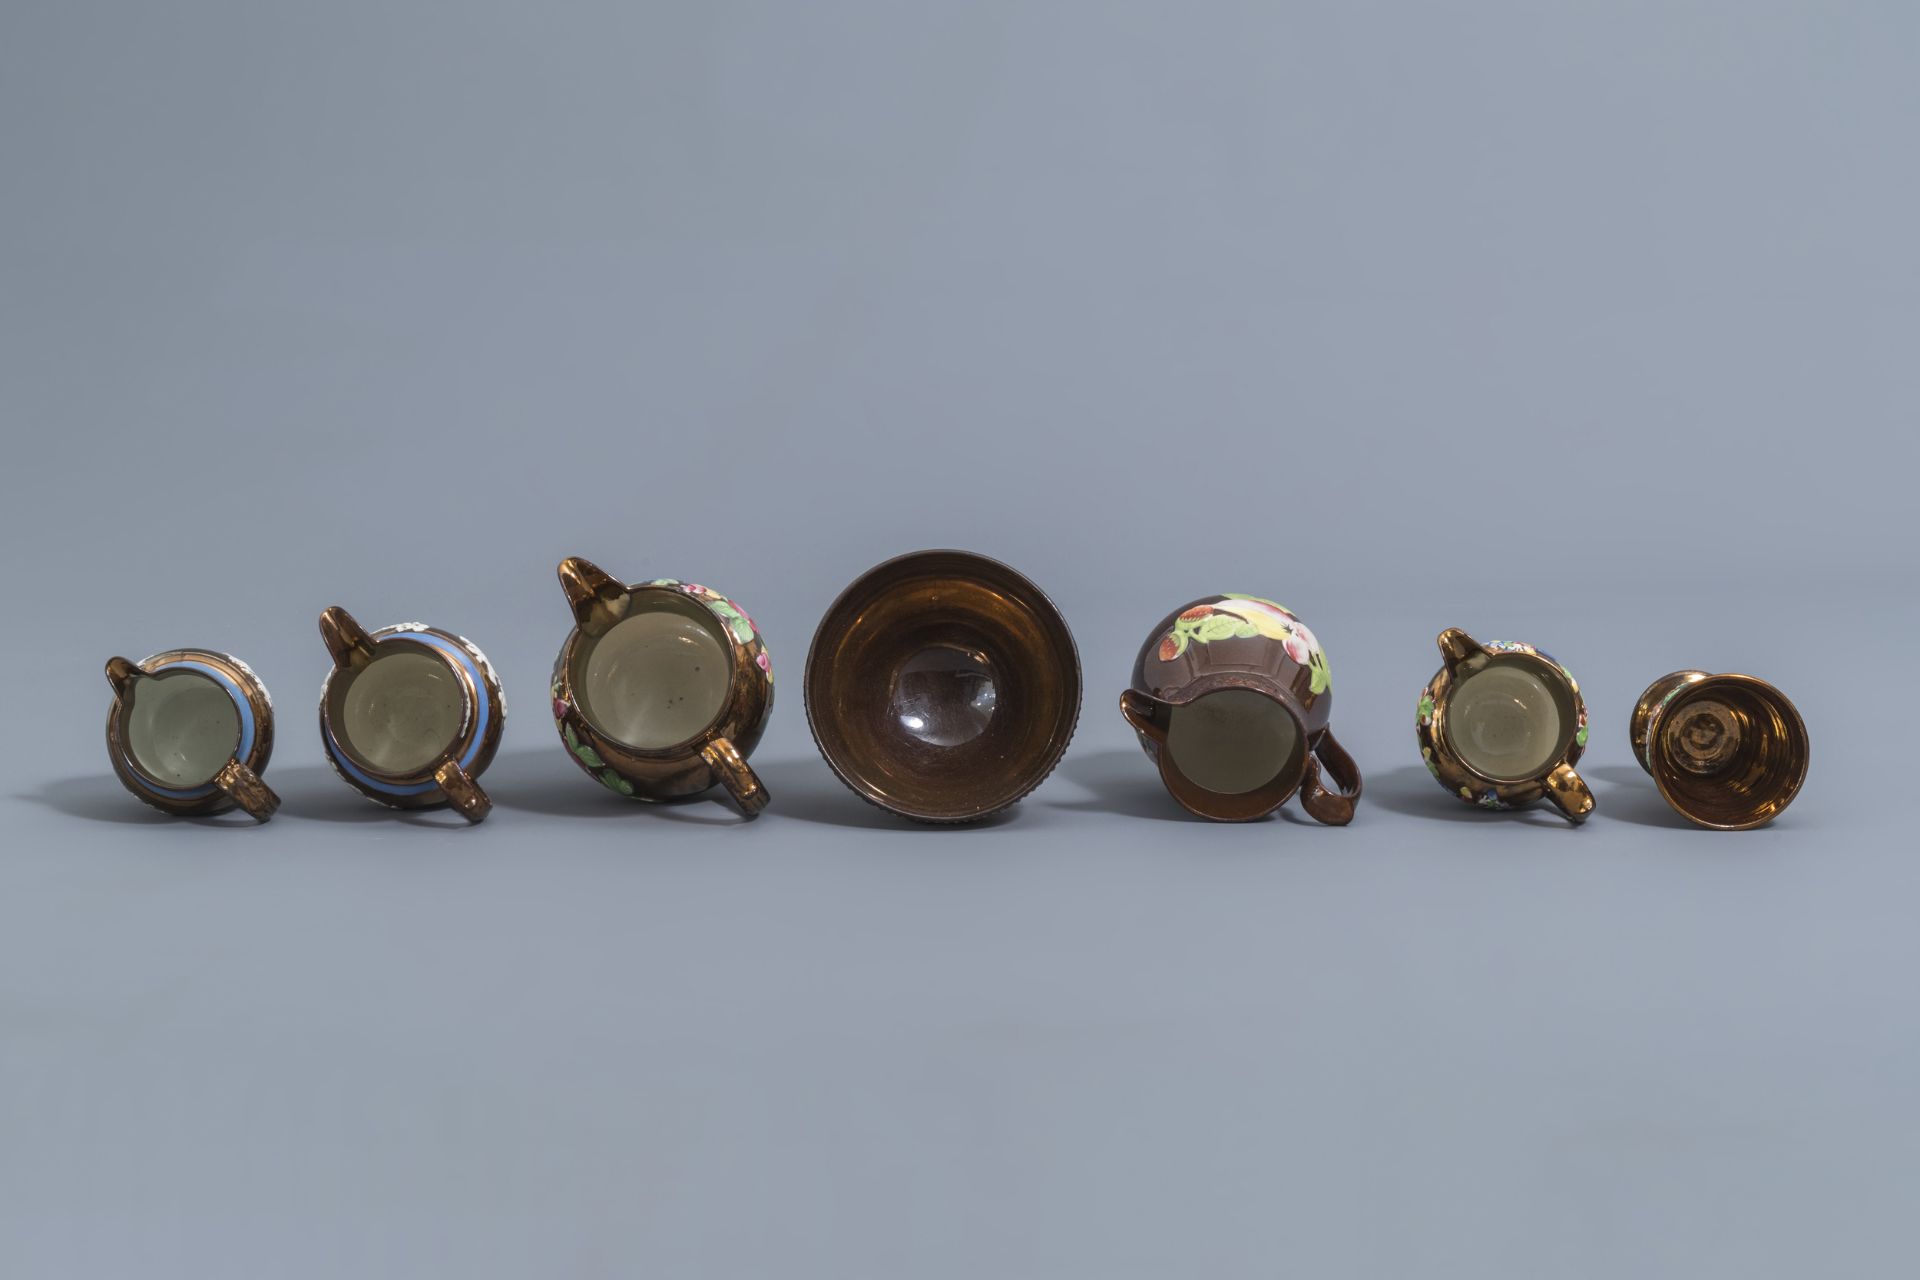 A varied collection of English lustreware items with relief design, 19th C. - Image 14 of 50